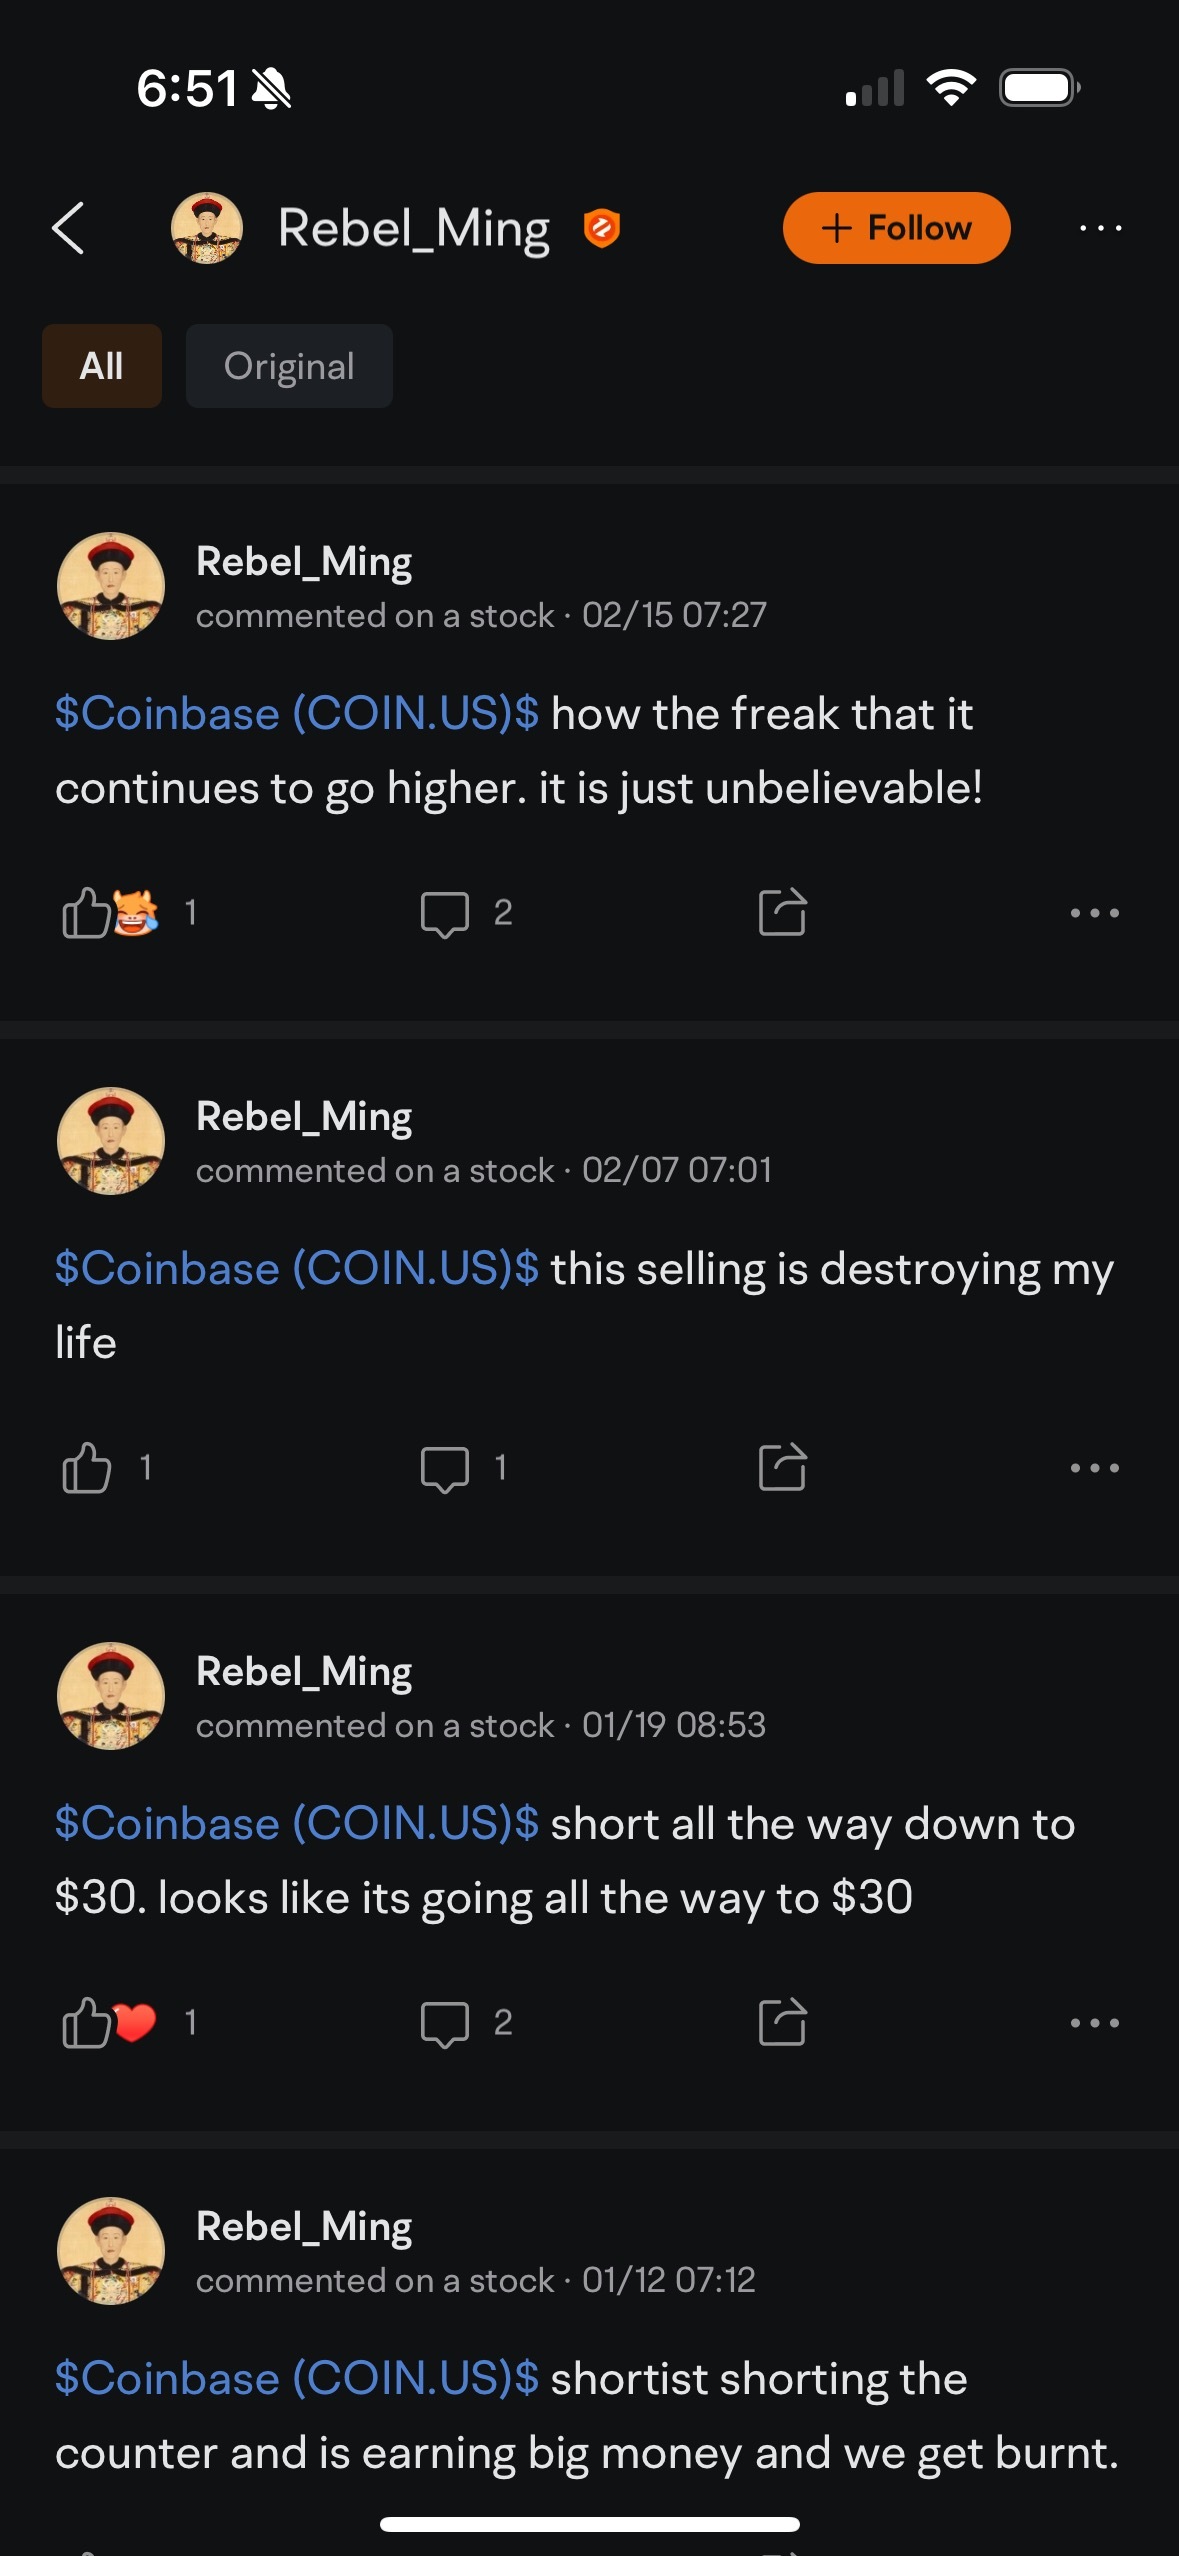 Rebel_Ming lost money shorting COIN LOL